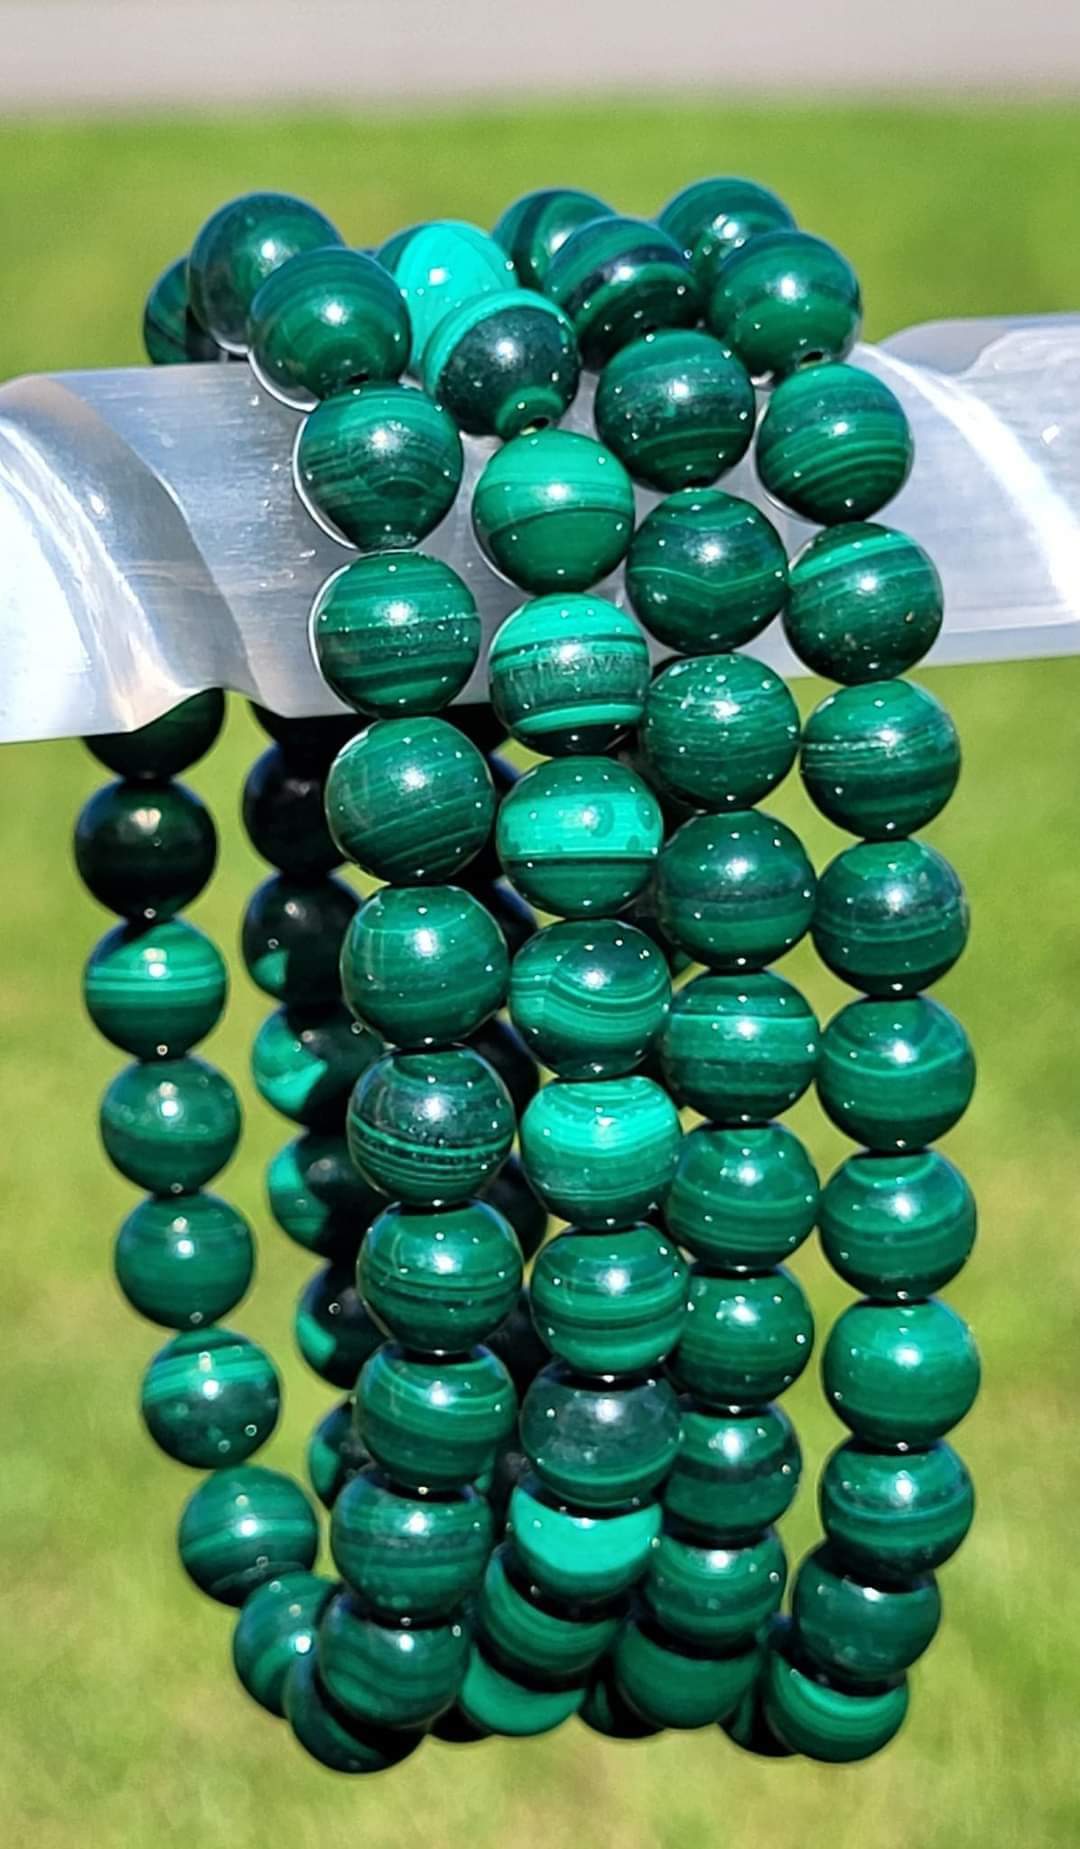 Malachite - protection, relieve menstral disorders, strengthen immune and nervous system, repair DNA & cellular structure, menopause